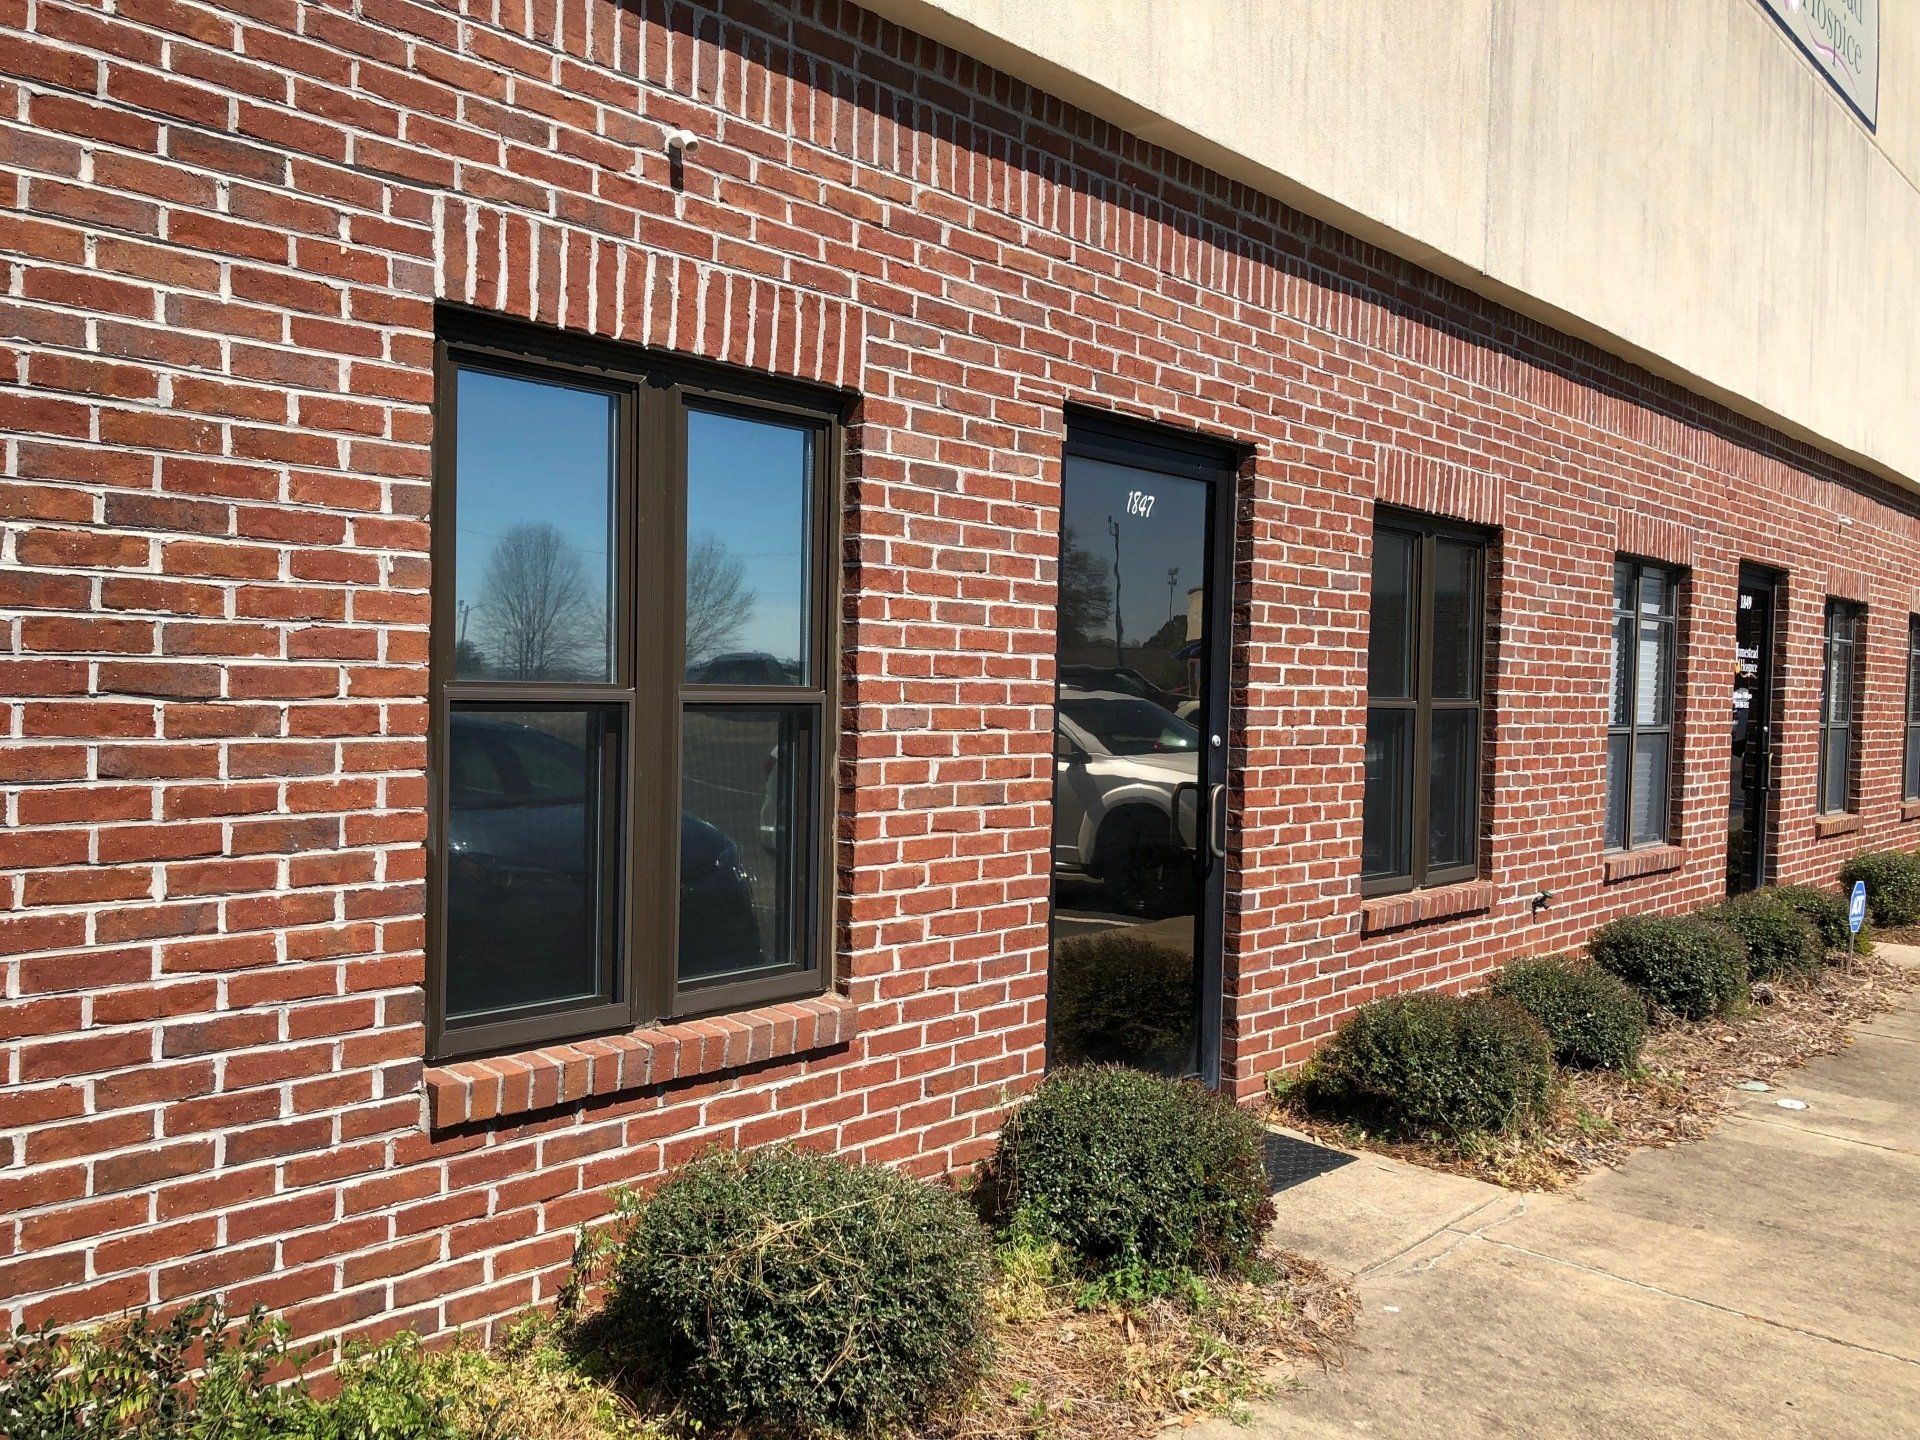 Business Tinting service in Prattville - SEL's Office Tinted in Prattville, AL 2019